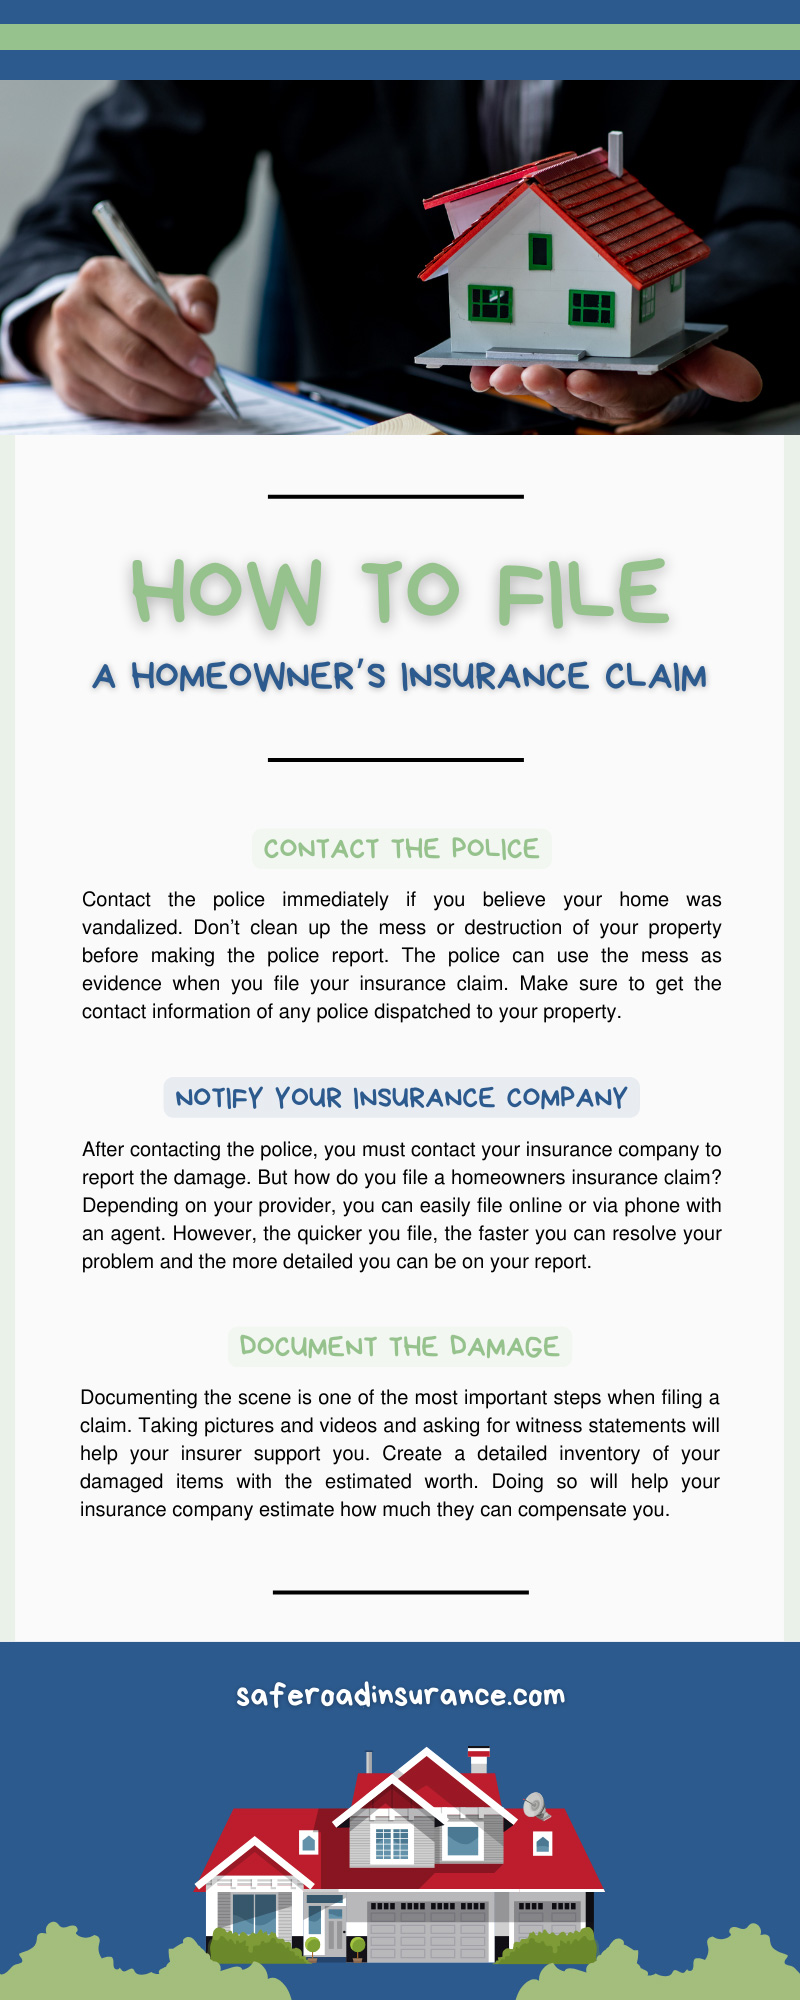 How To File a Homeowner’s Insurance Claim